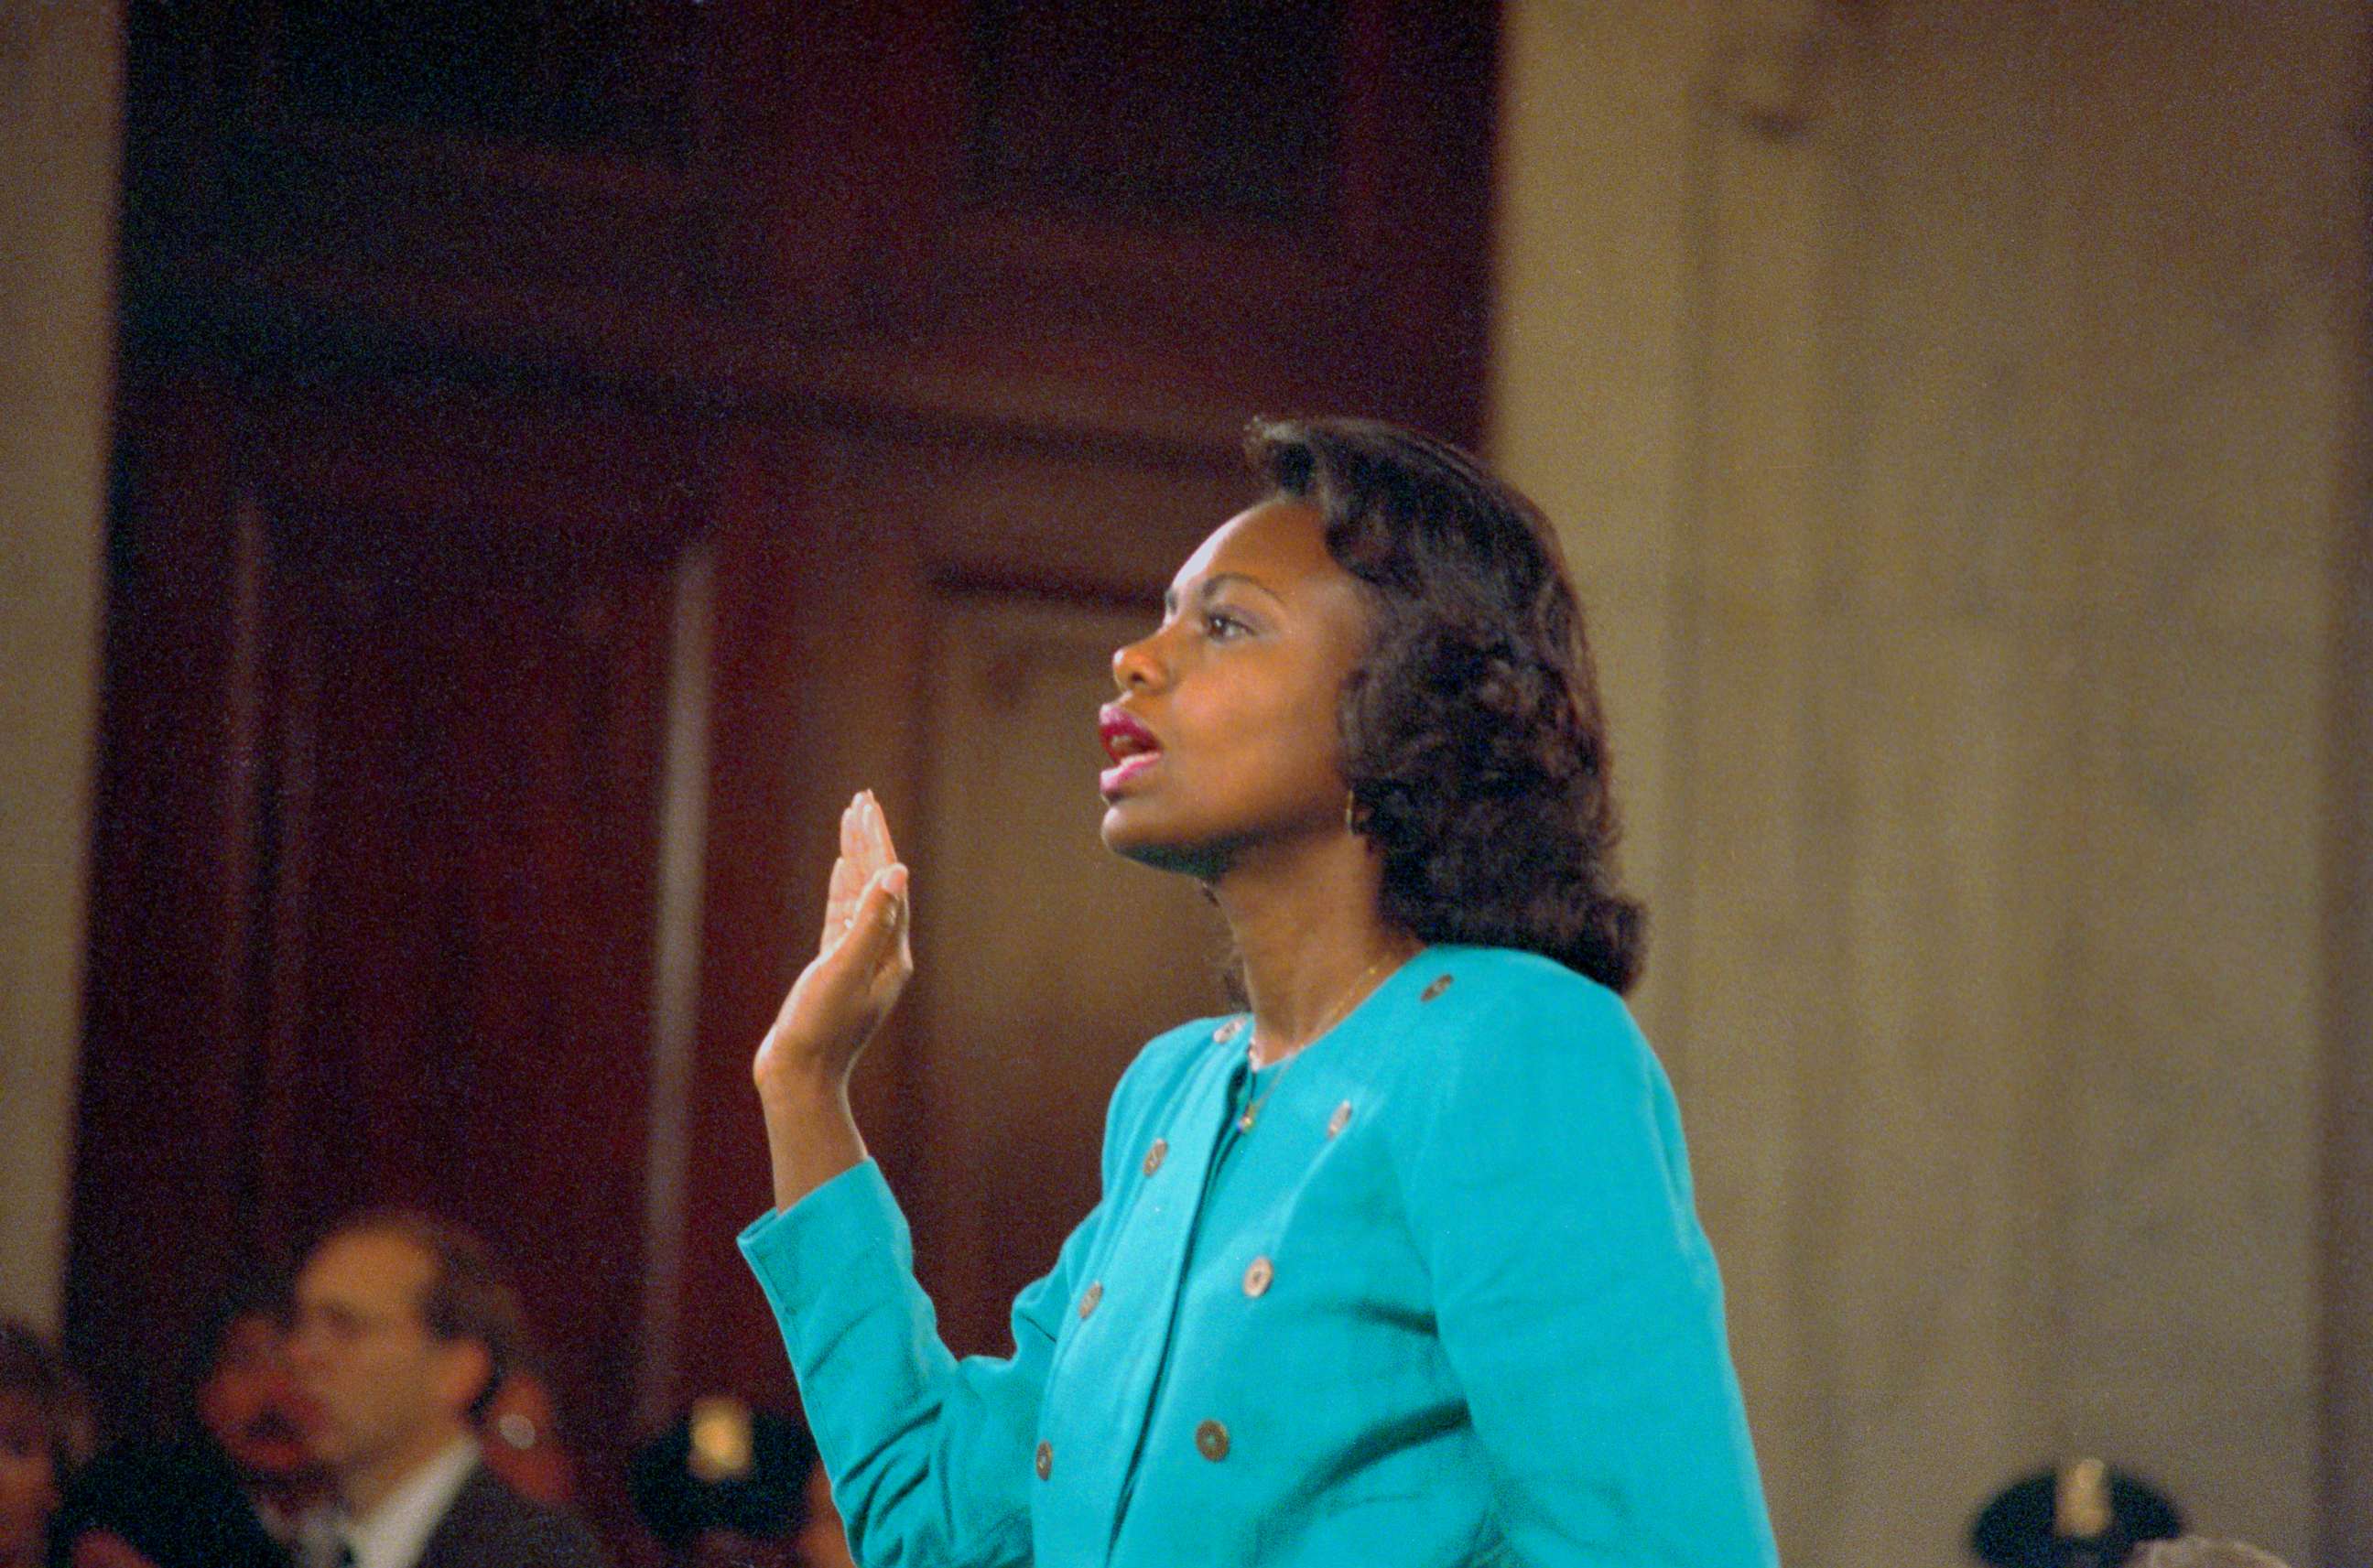 PHOTO: Anita Hill is sworn-in before testifying at the Senate Judiciary hearing on the Clarence Thomas Supreme Court nomination.